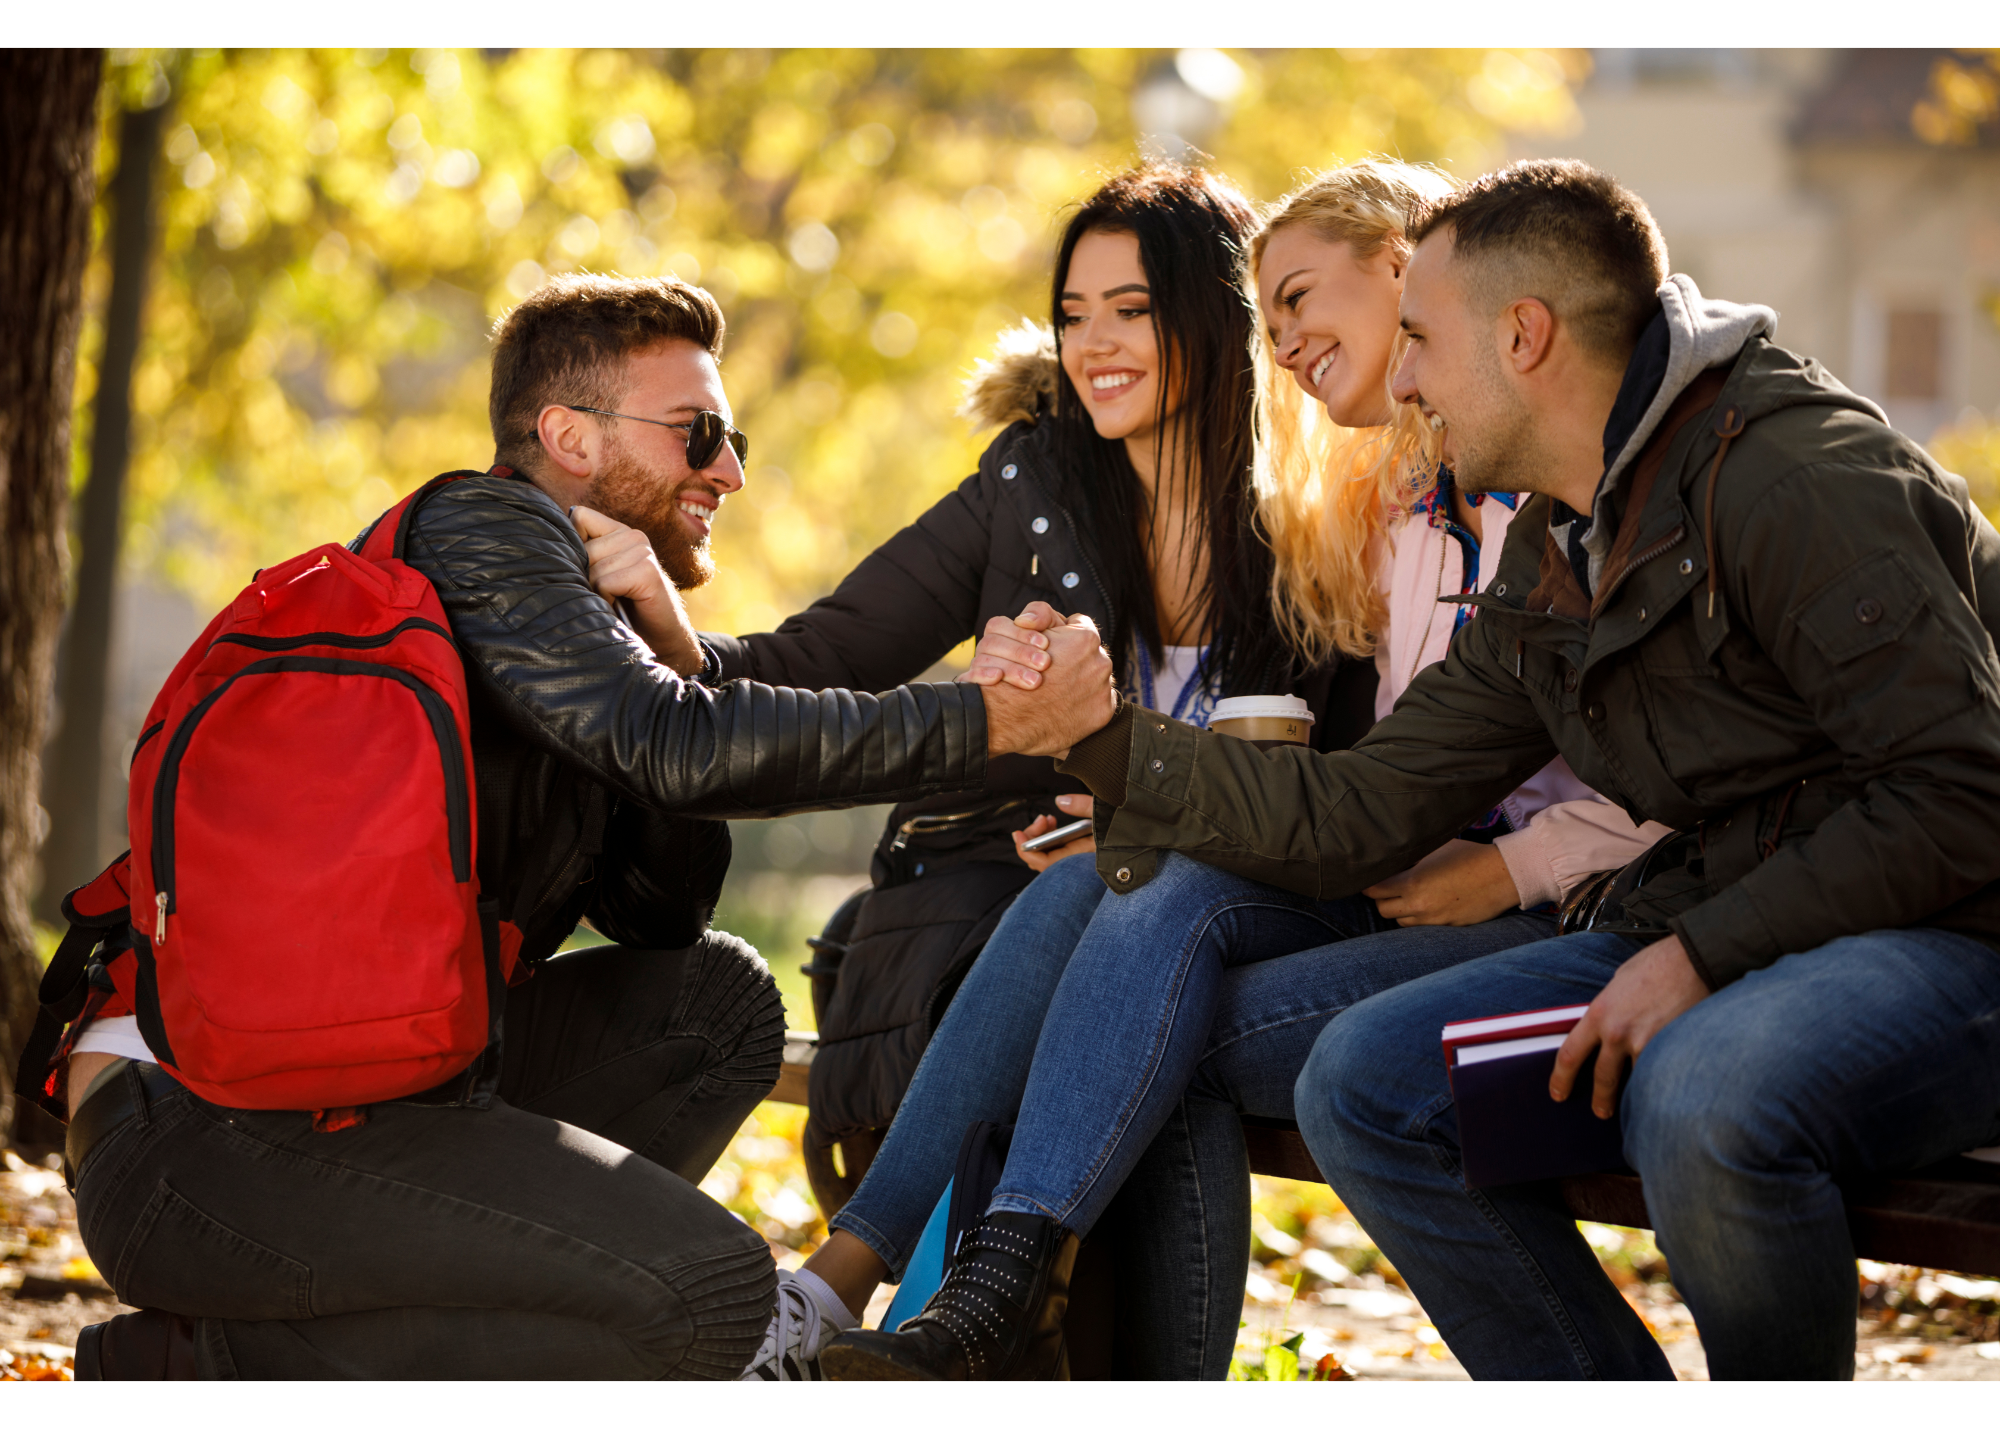 Three adults sit on a bench while shaking the hand of a smiling man. This could represent introducing one’s self to new friends. Learn how life changes counseling in North Carolina can offer support for making new friends by contacting a therapist in New Bern, NC. They can offer online therapy in North Carolina and other services. 